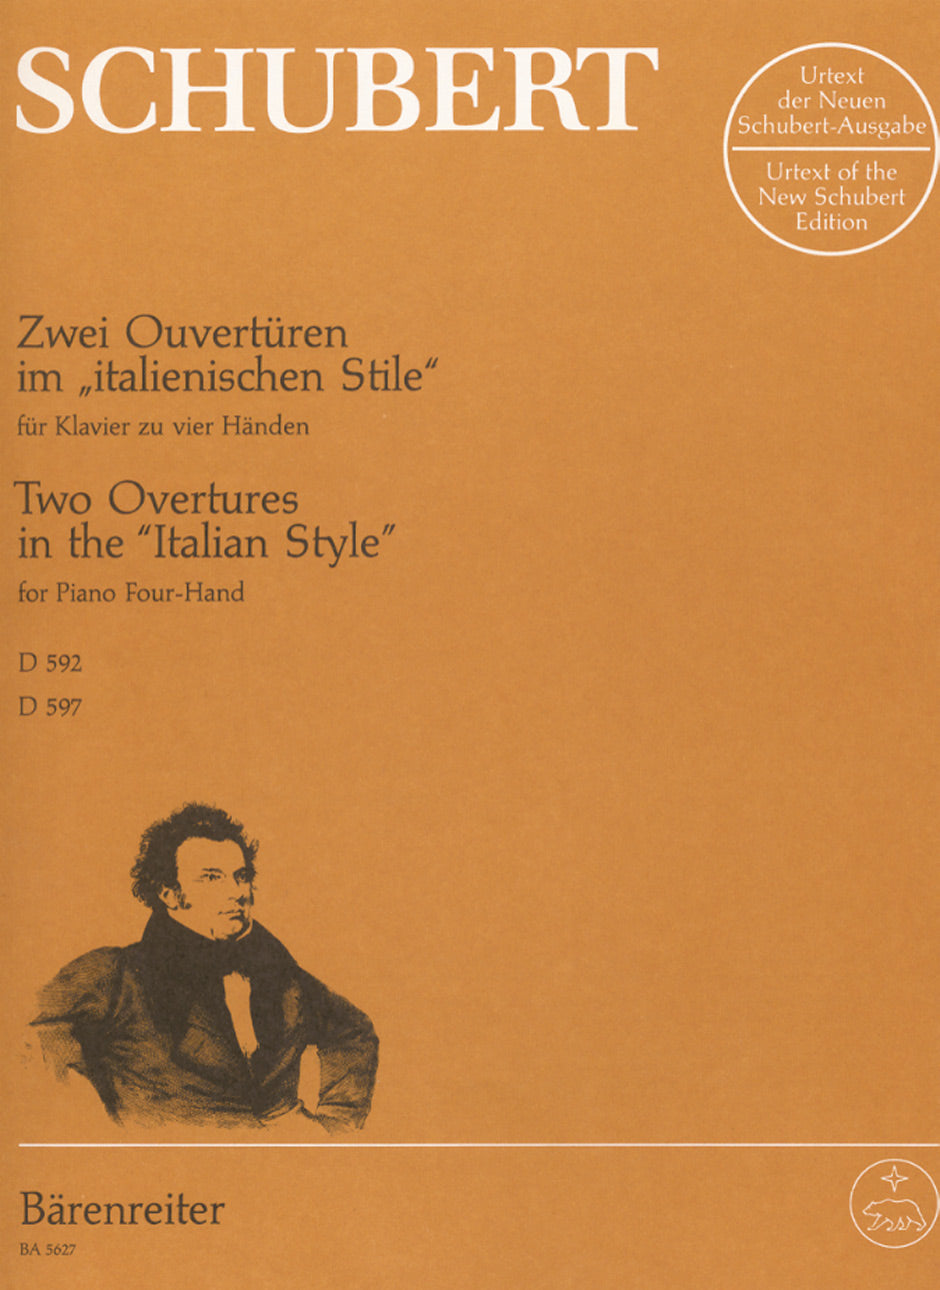 Schubert: Two Overtures in "Italian Style", D 592 and 597